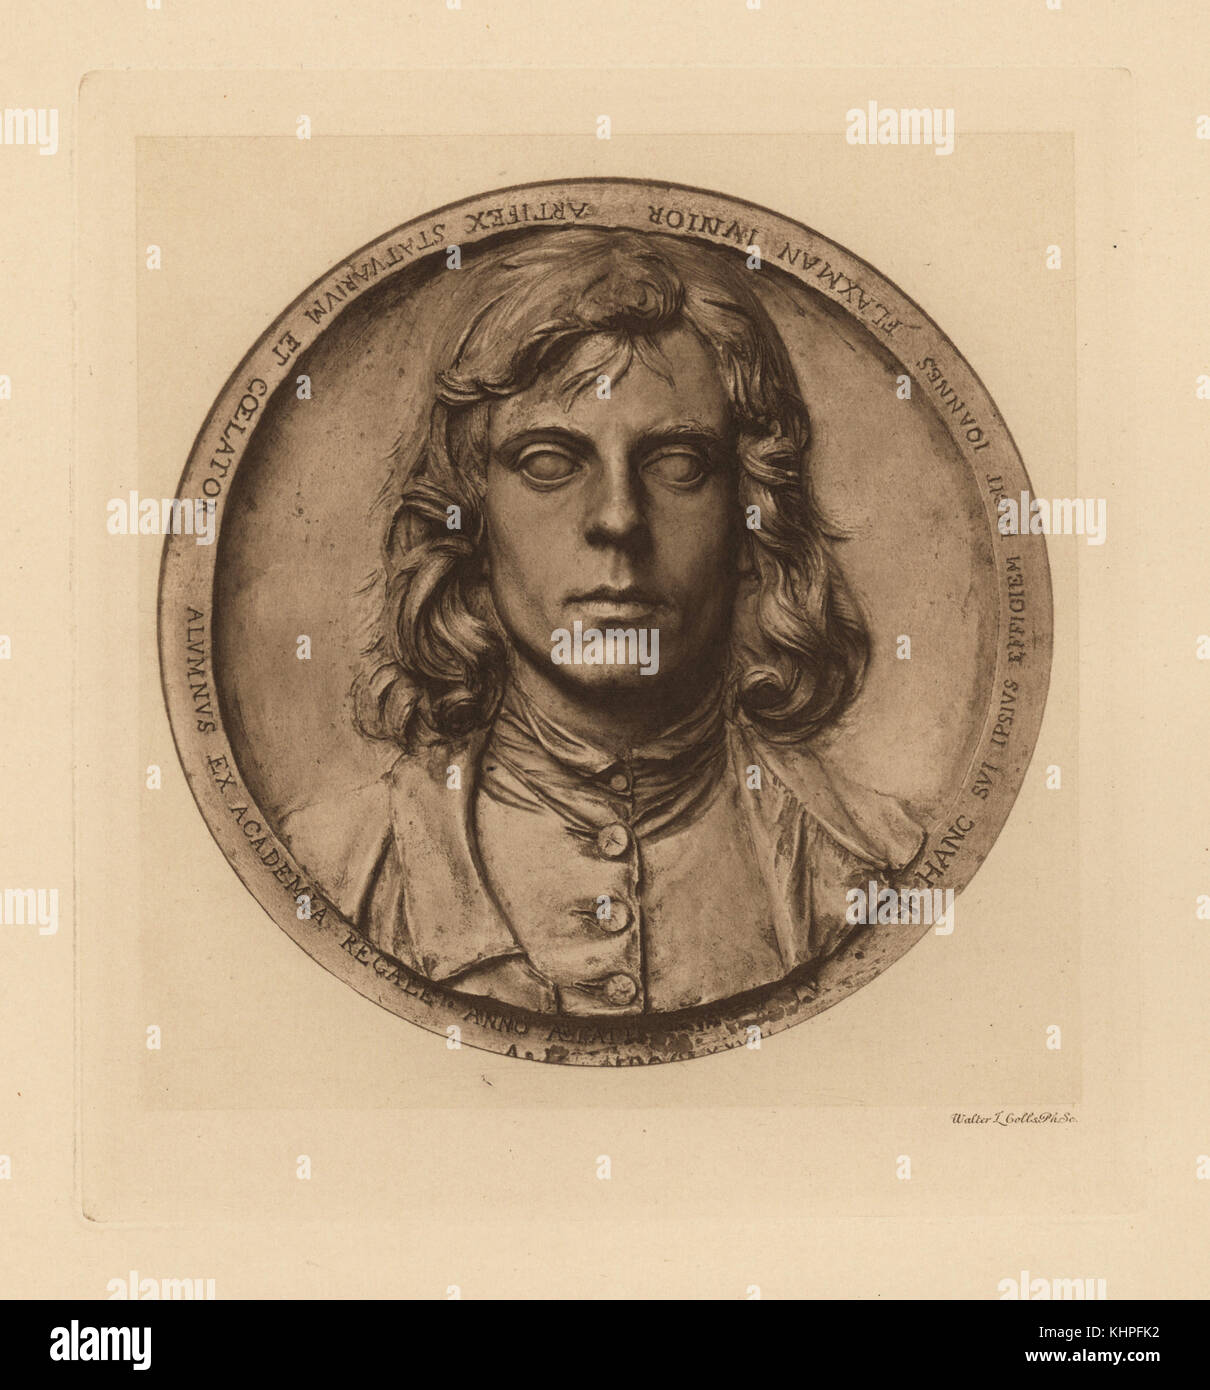 Self-portrait of John Flaxman in terracotta. Engraving by Walter L. Colls from Frederick Rathbone's Old Wedgwood, the Decorative or Artistic Ceramic Work Produced by Josiah Wedgwood, Quaritch, London, 1898. Stock Photo